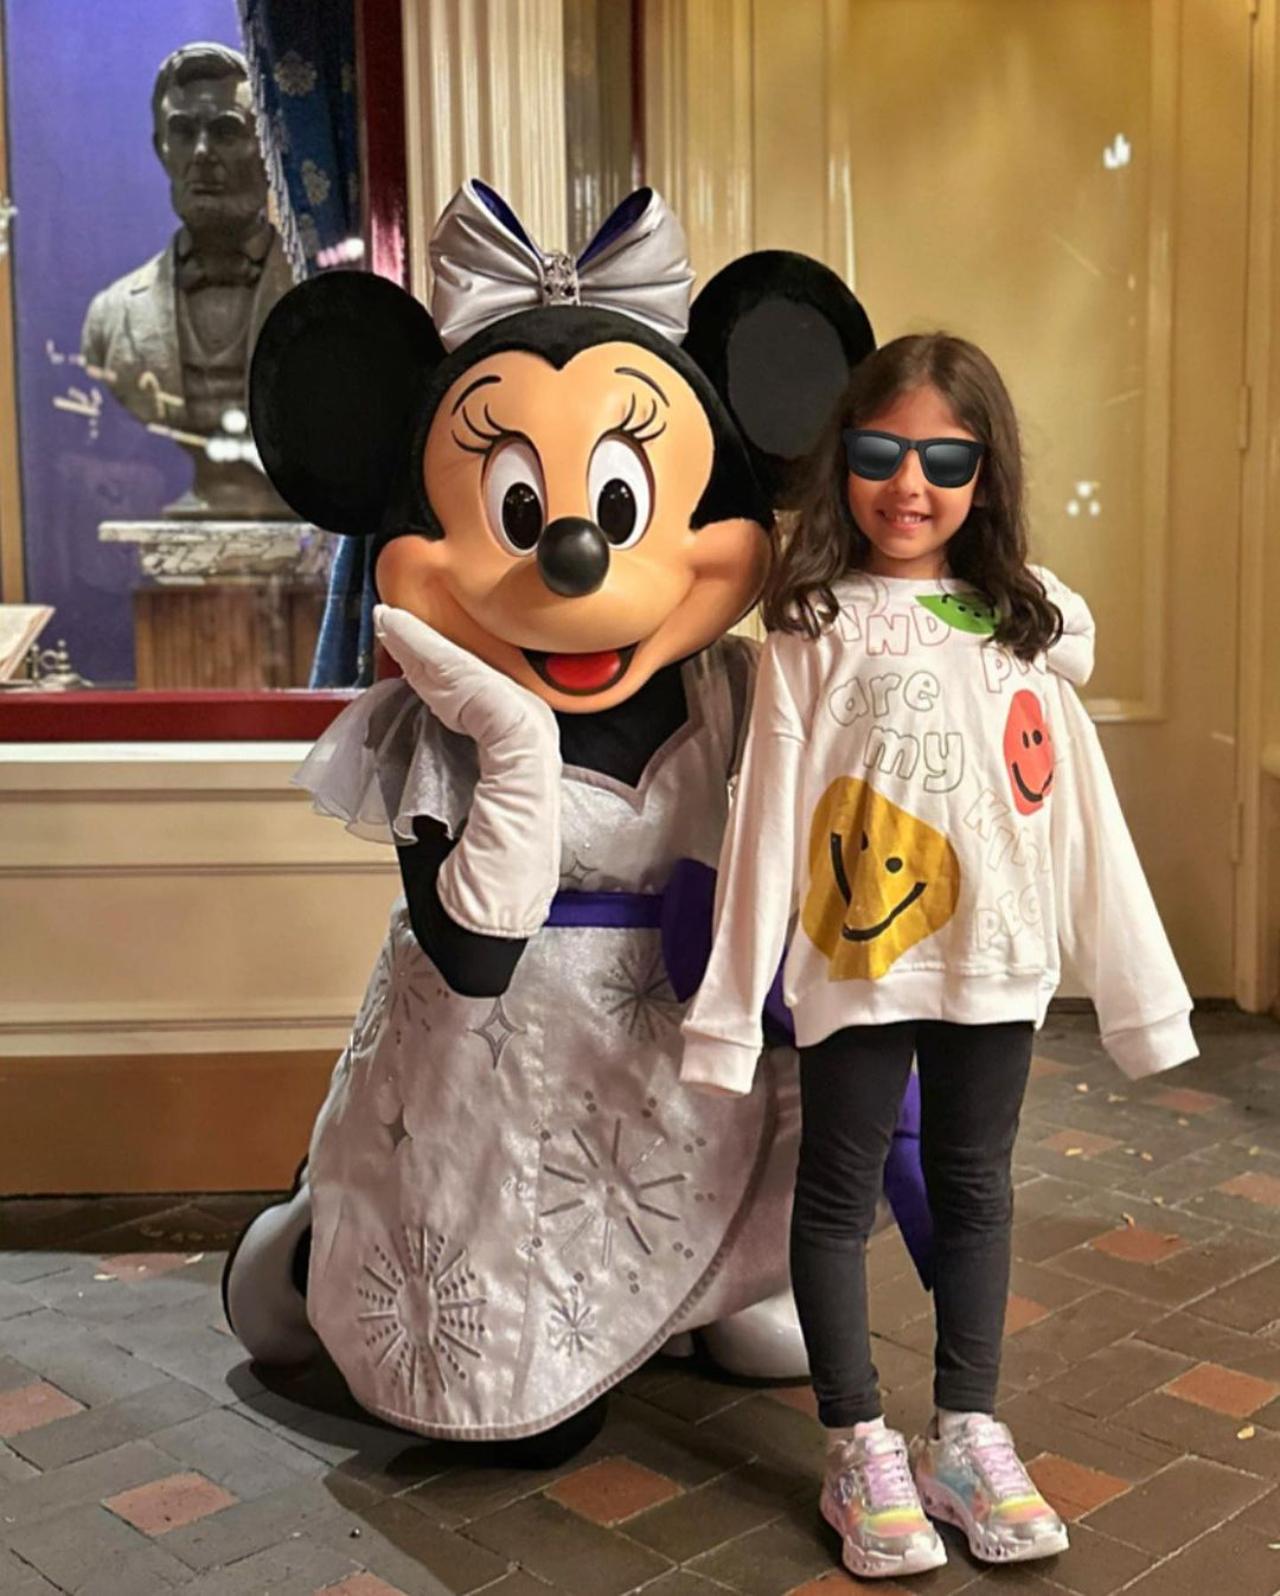 Who wouldn't be excited to meet Minnie Mouse? Inaaya looks super happy in her cute white hoodie and sparkly shoes